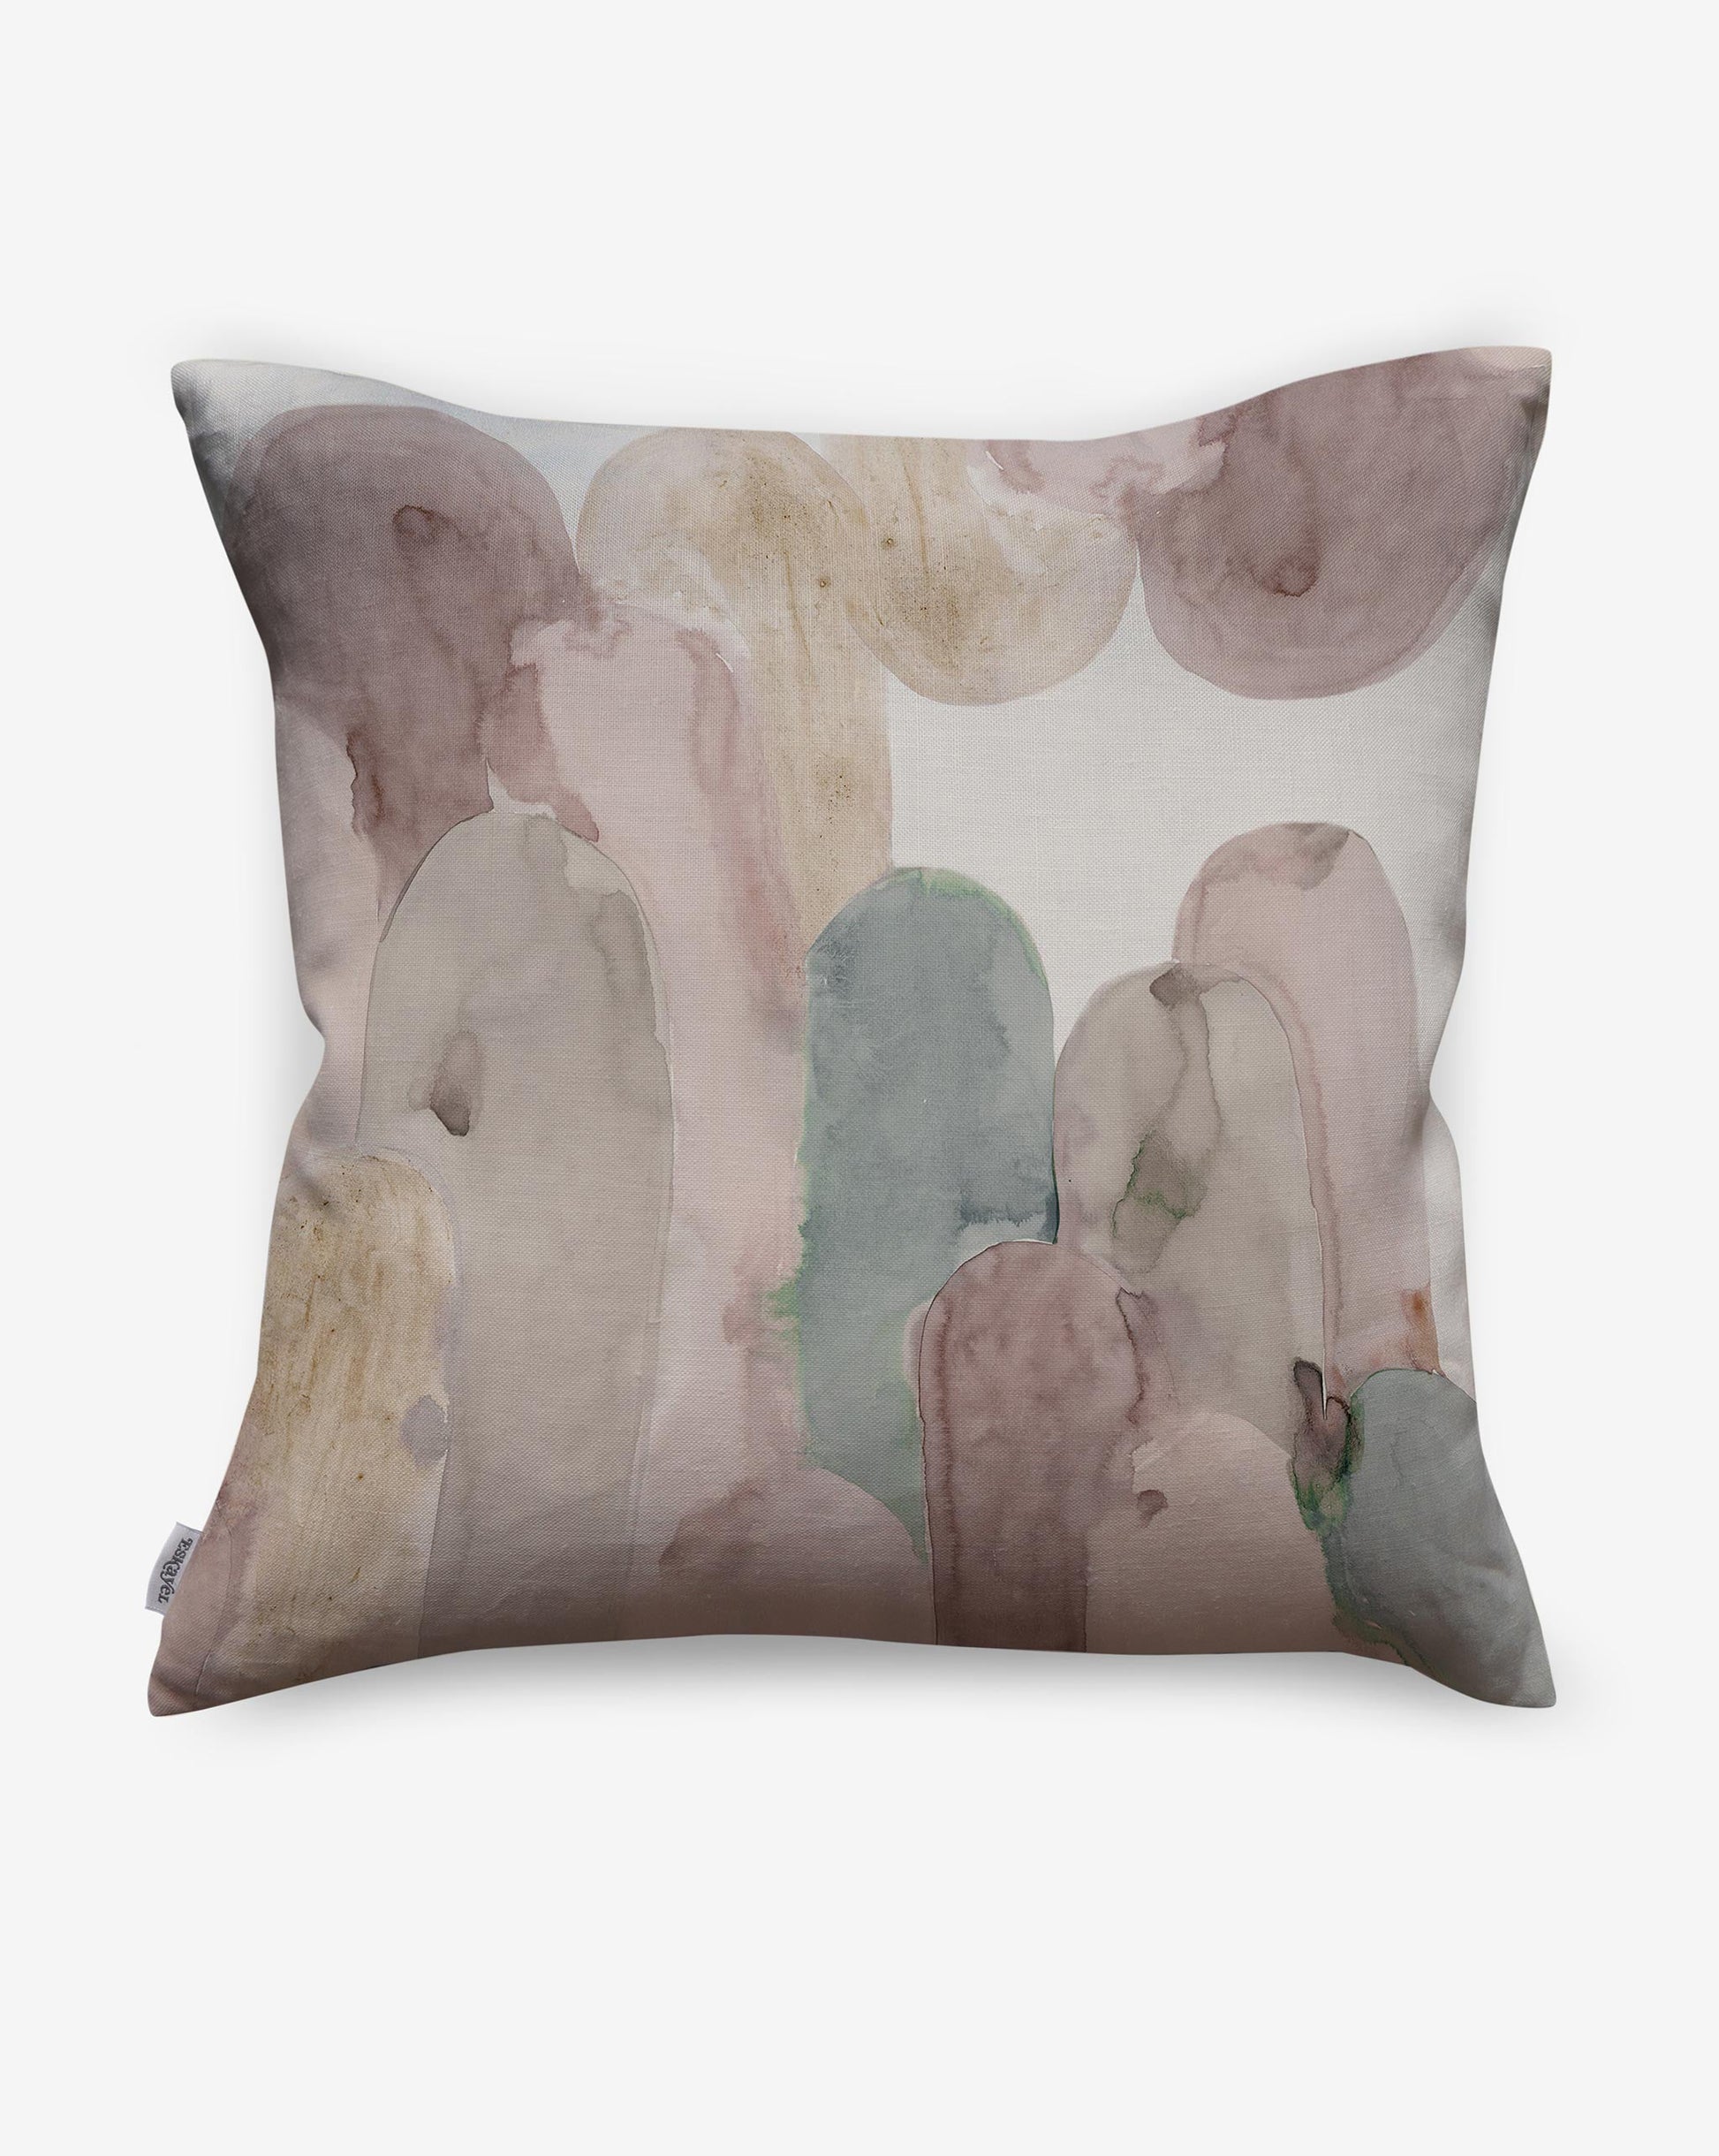 Arcos luxury pillows in Dusk offer muted pinks and sage green as a soft geometric pattern of curves and columns